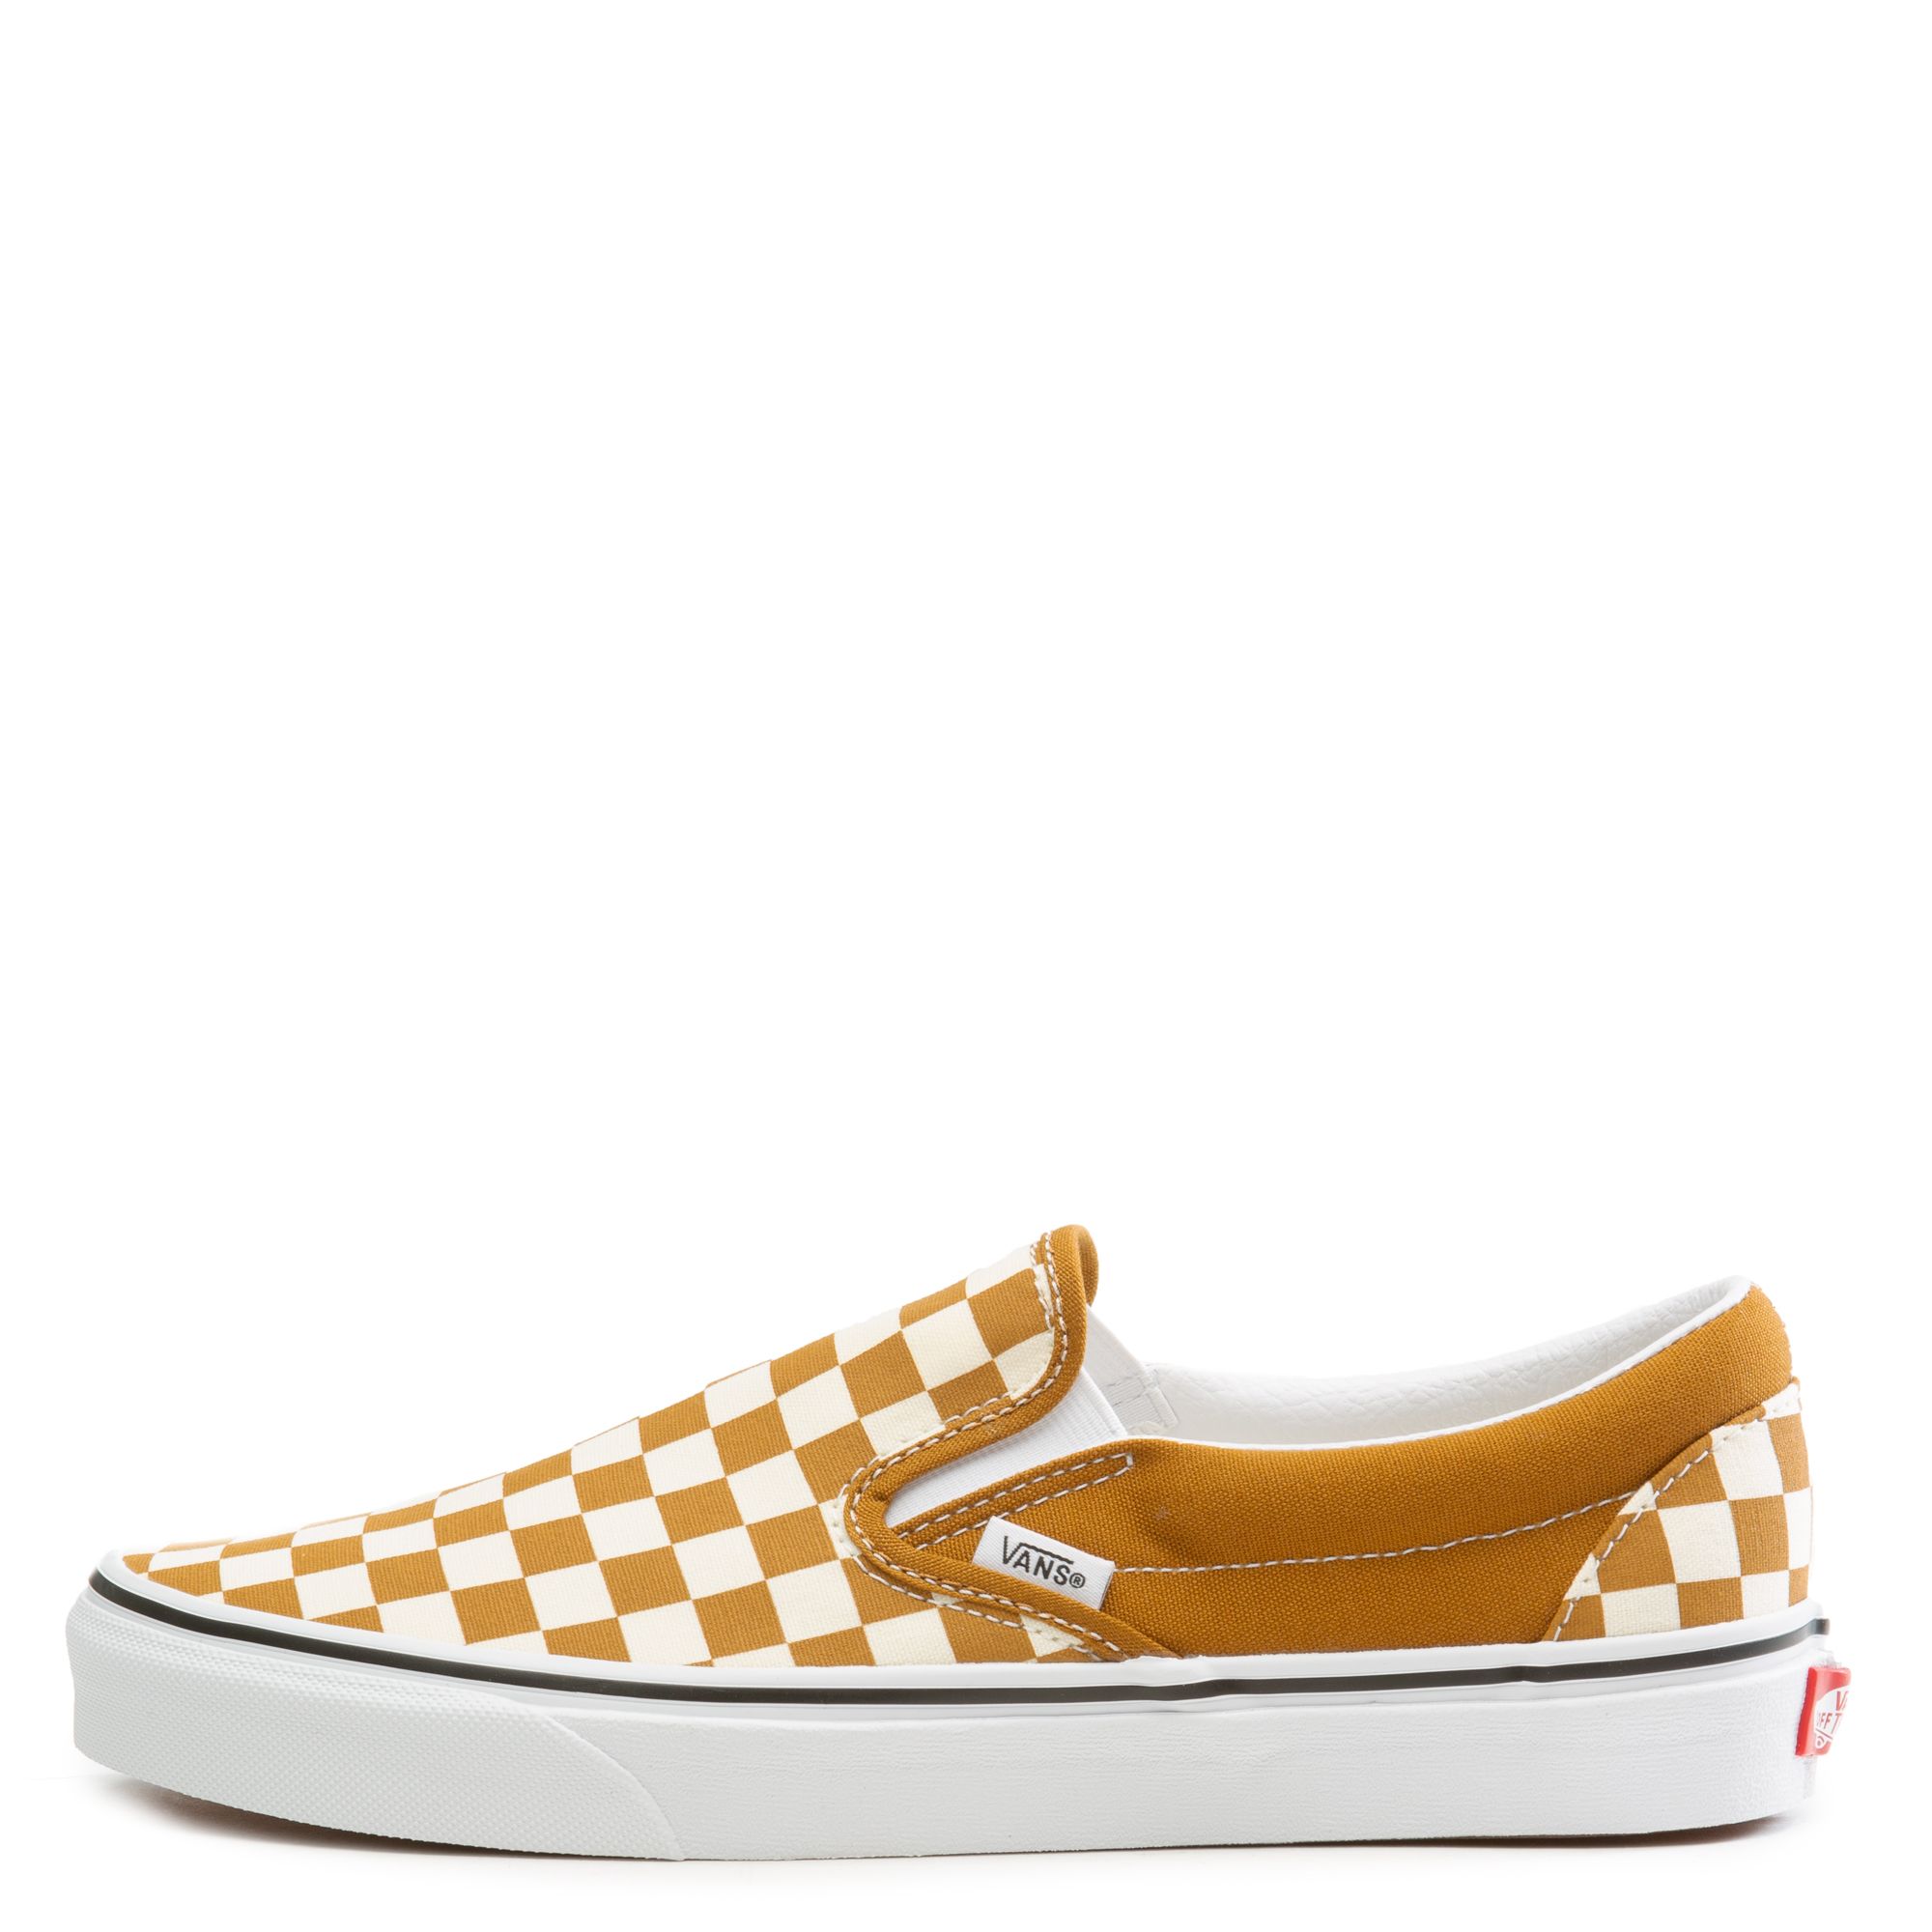 VANS Yellow & White Checkered Slip On Sneakers Kids US Size 7